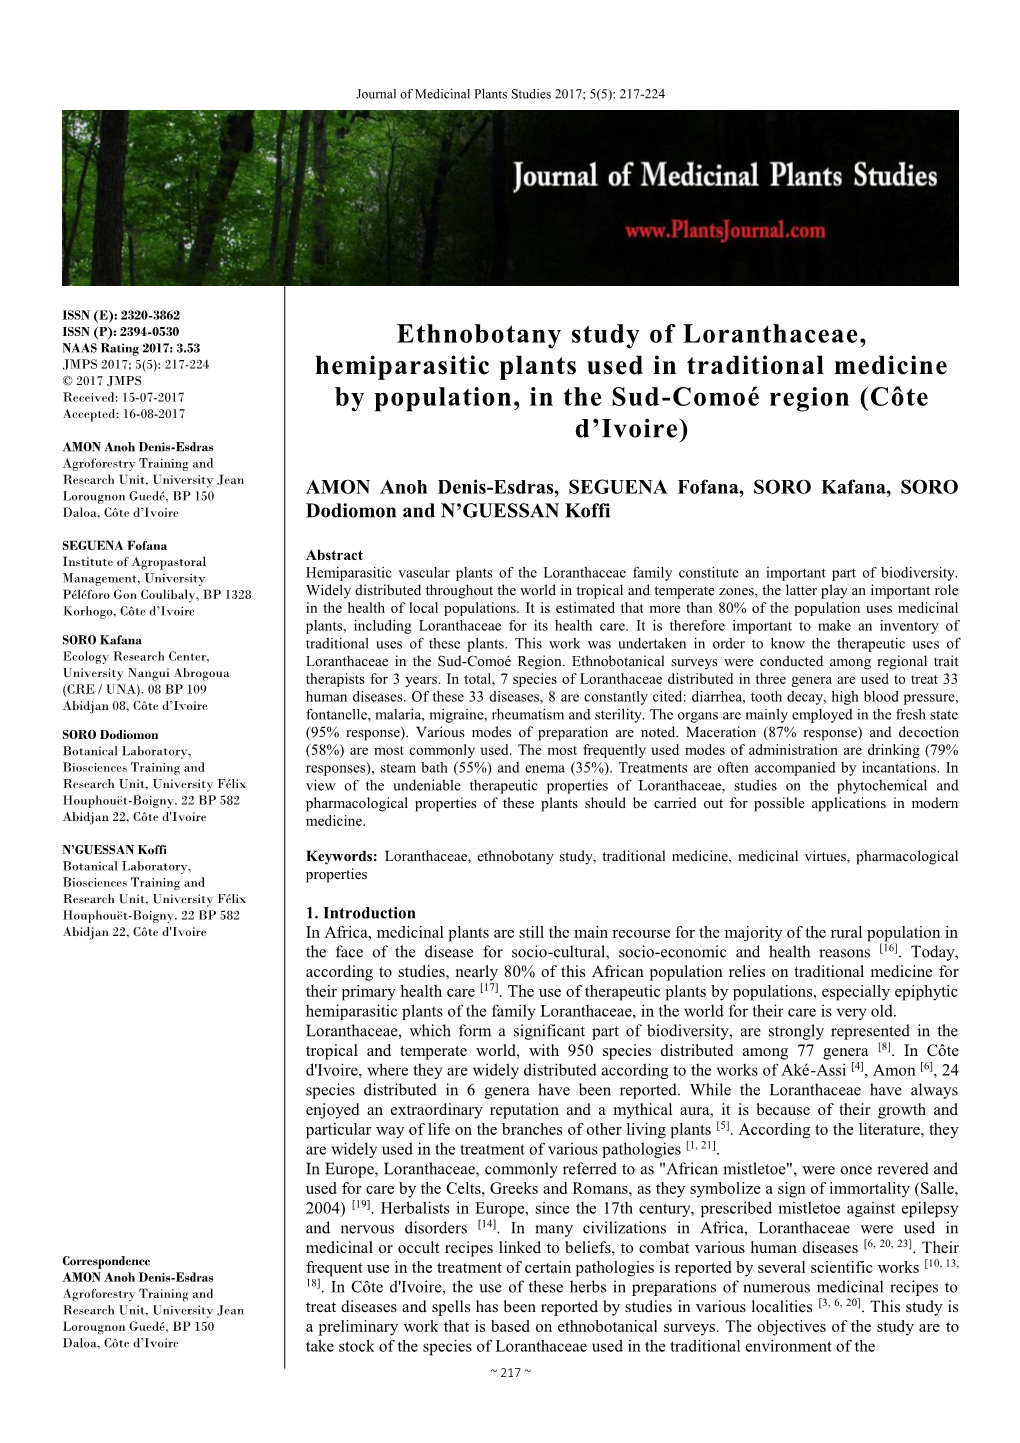 Ethnobotany Study of Loranthaceae, Hemiparasitic Plants Used In